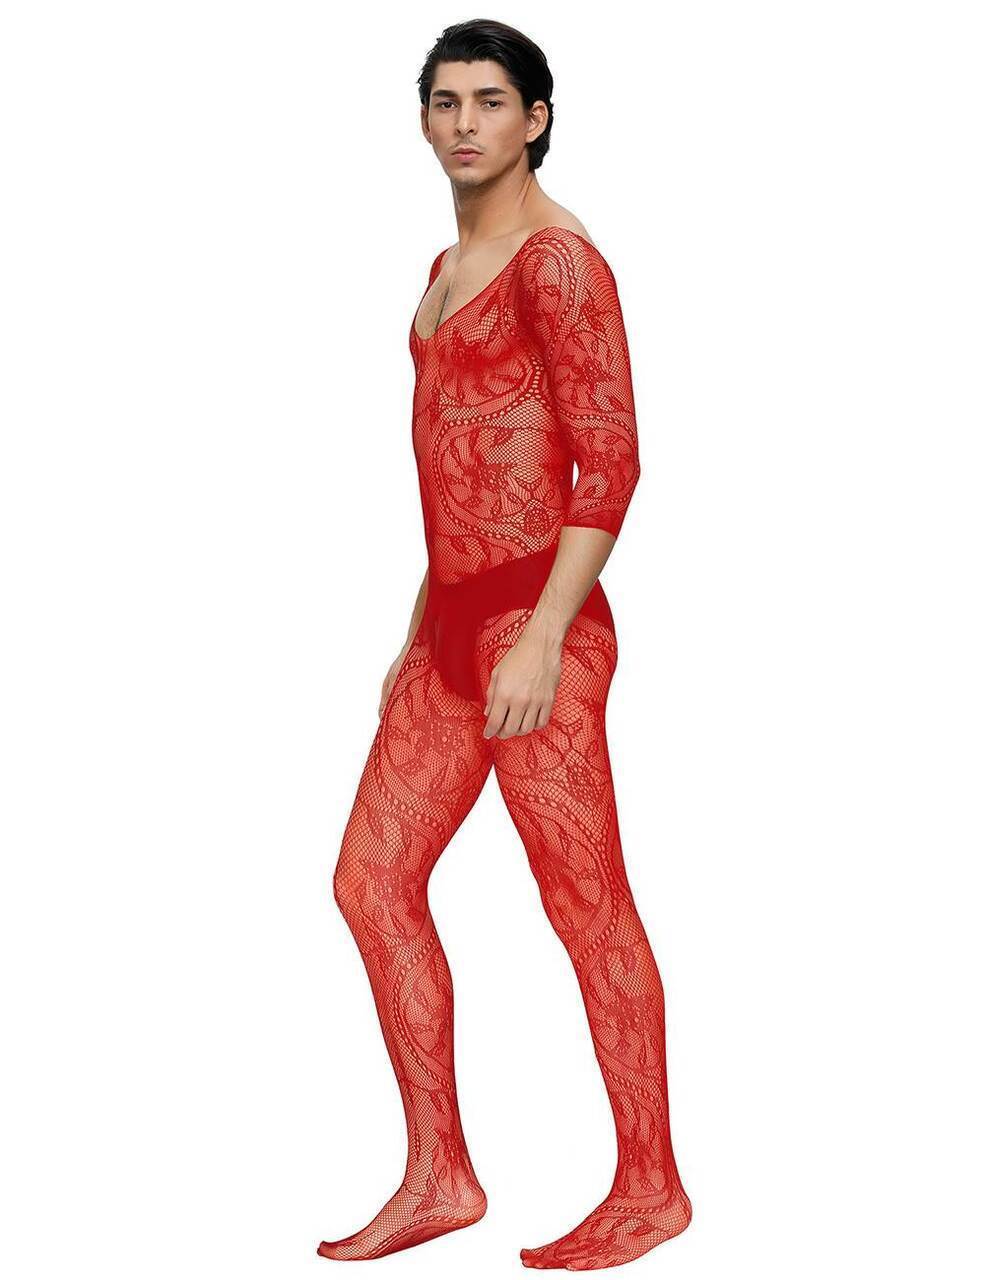 Mens Lingerie Floral Swirl Bodystocking with Sleeves Red